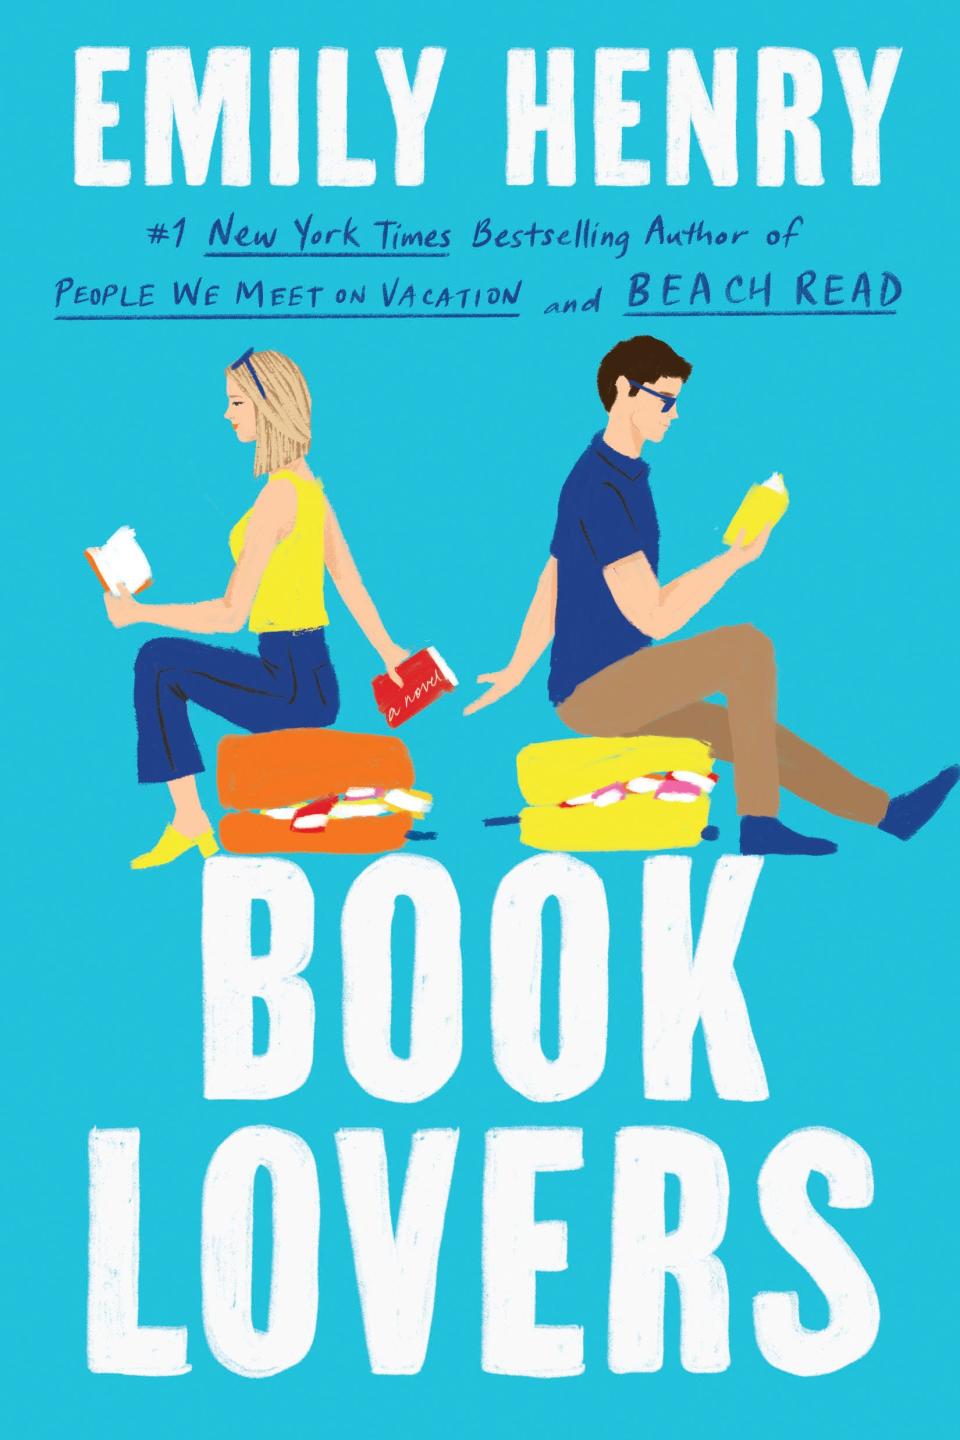 "Book Lovers," by Emily Henry